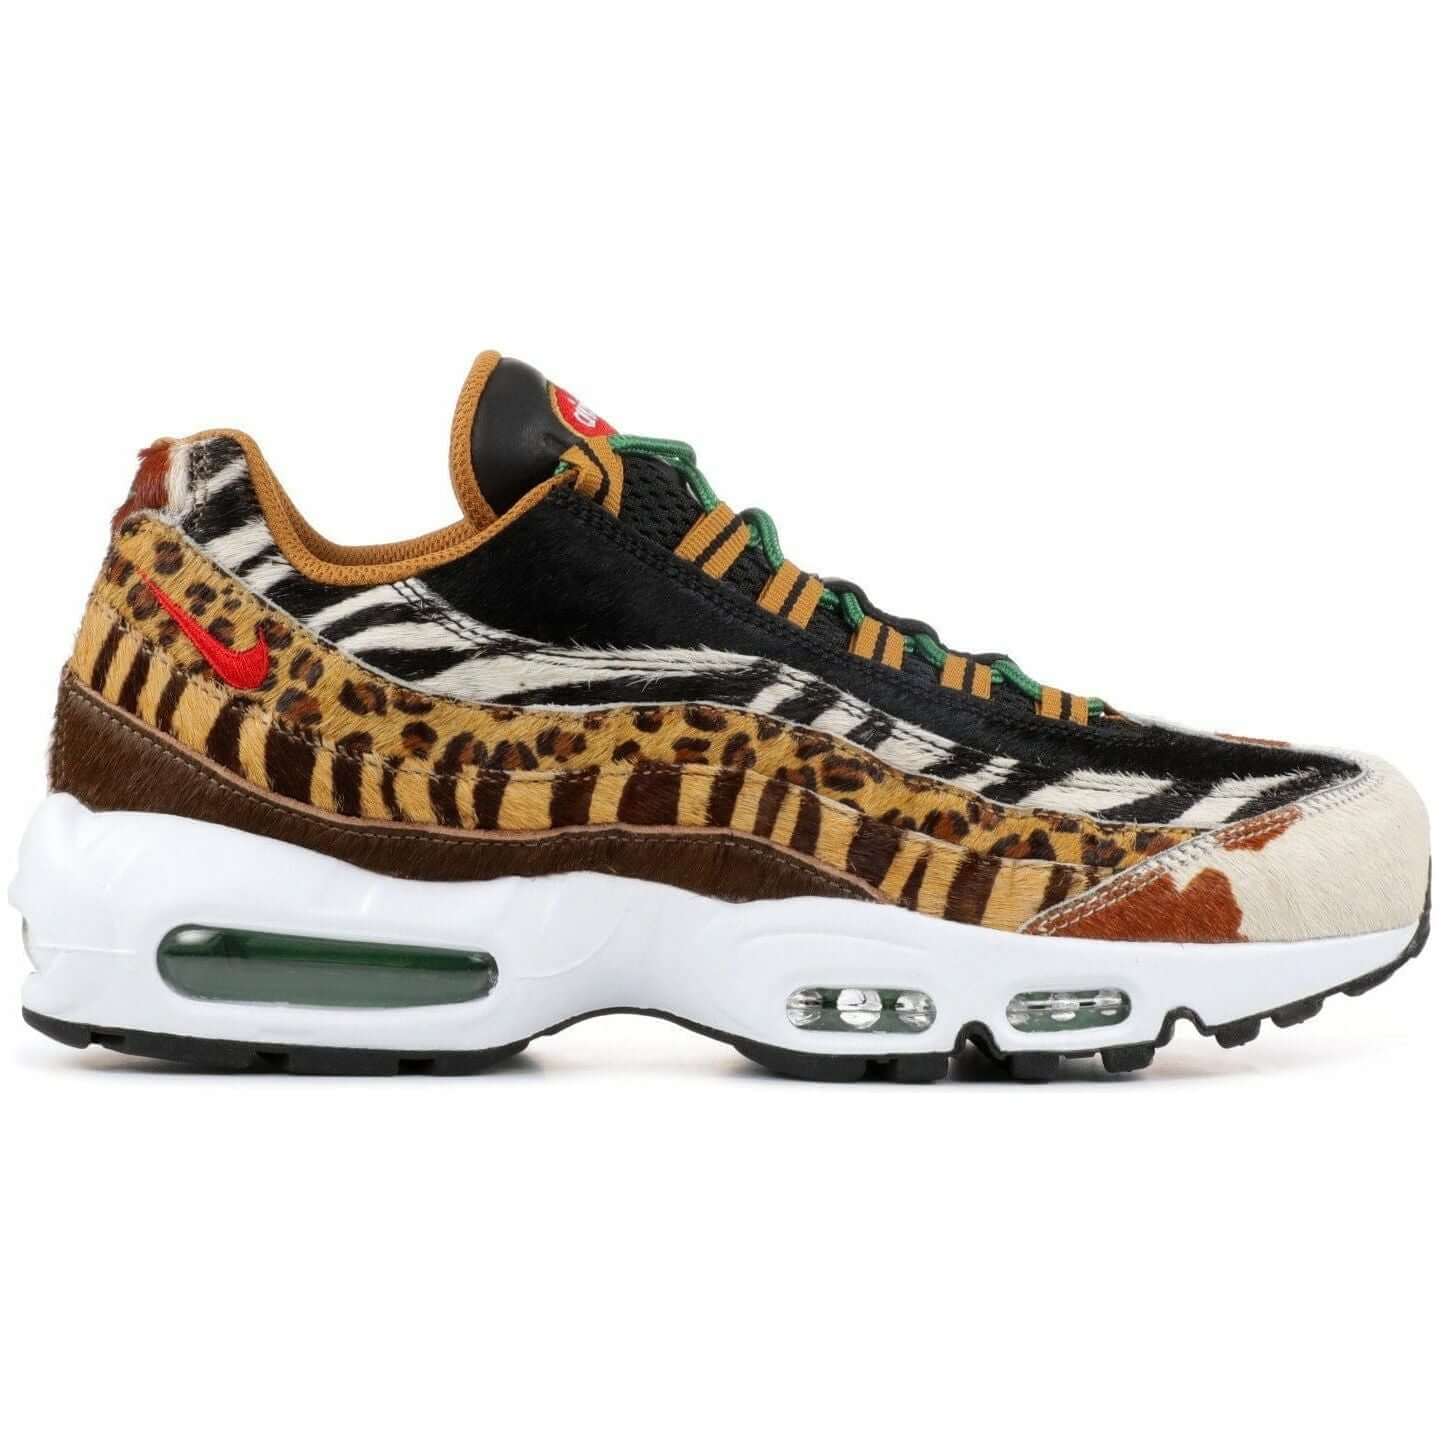 Air Max 95 Atmos Animal Pack 2.0 2018 from Nike